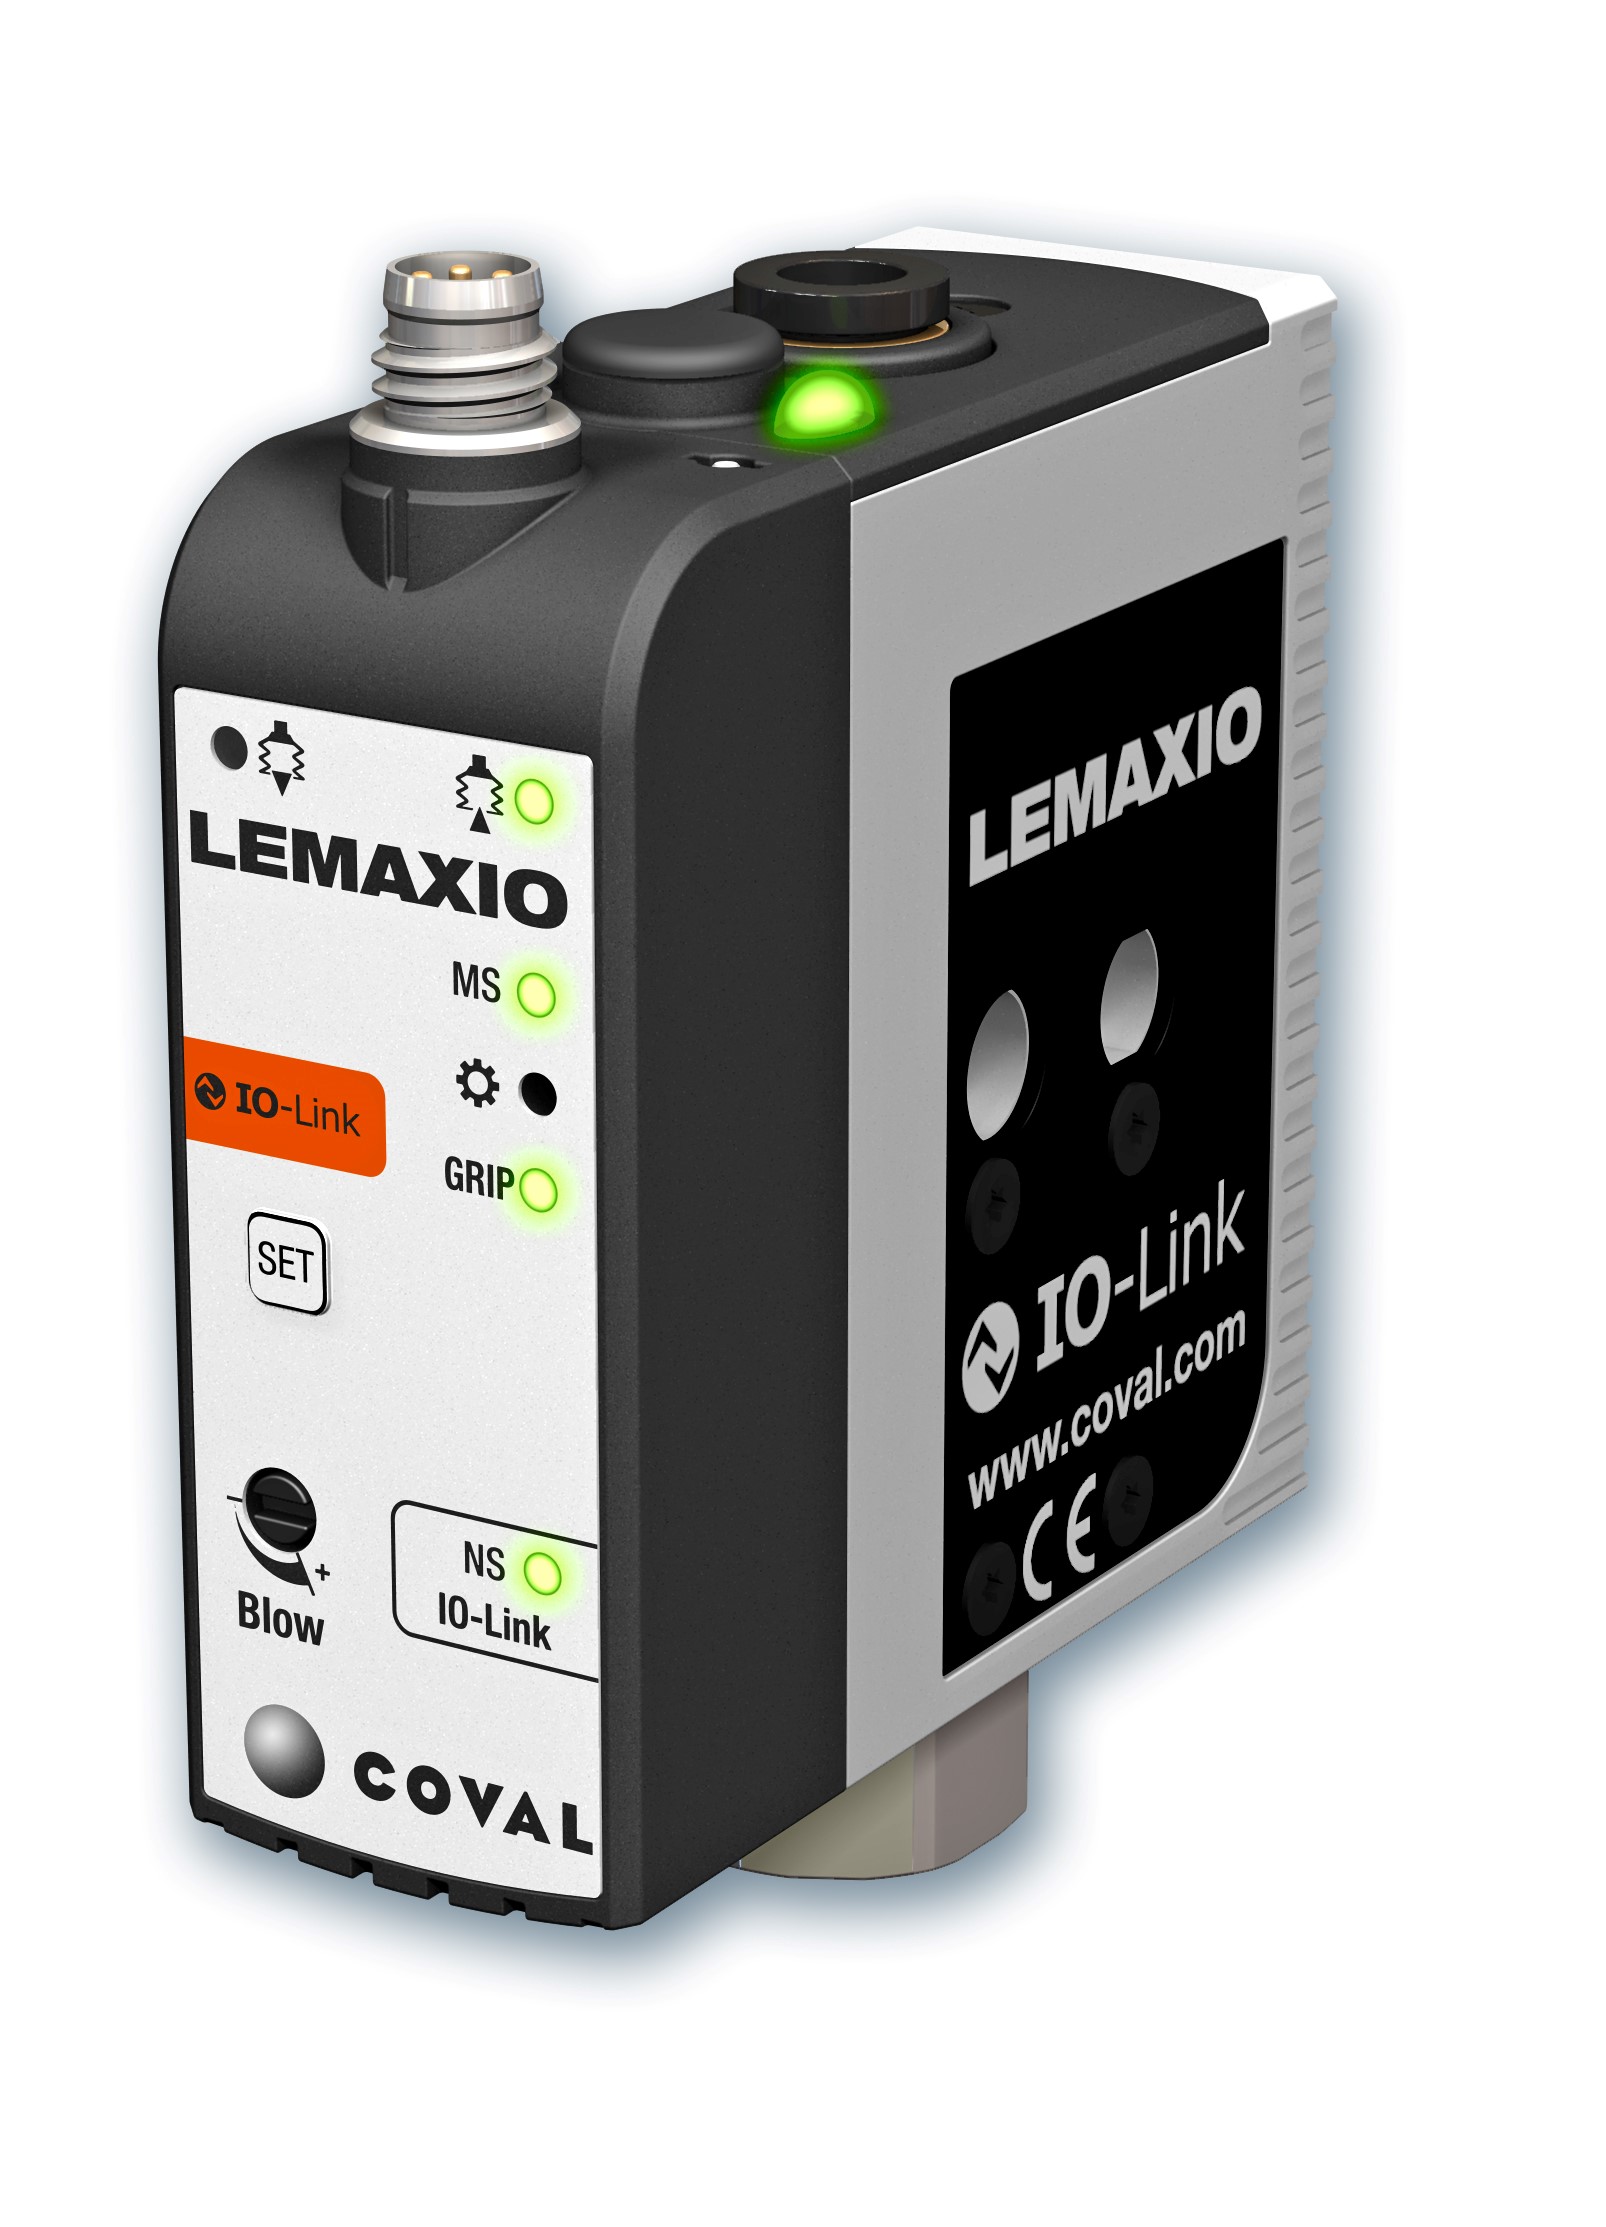 The all-in-one mini pumps are fully compatible with Industry 4.0 automation.